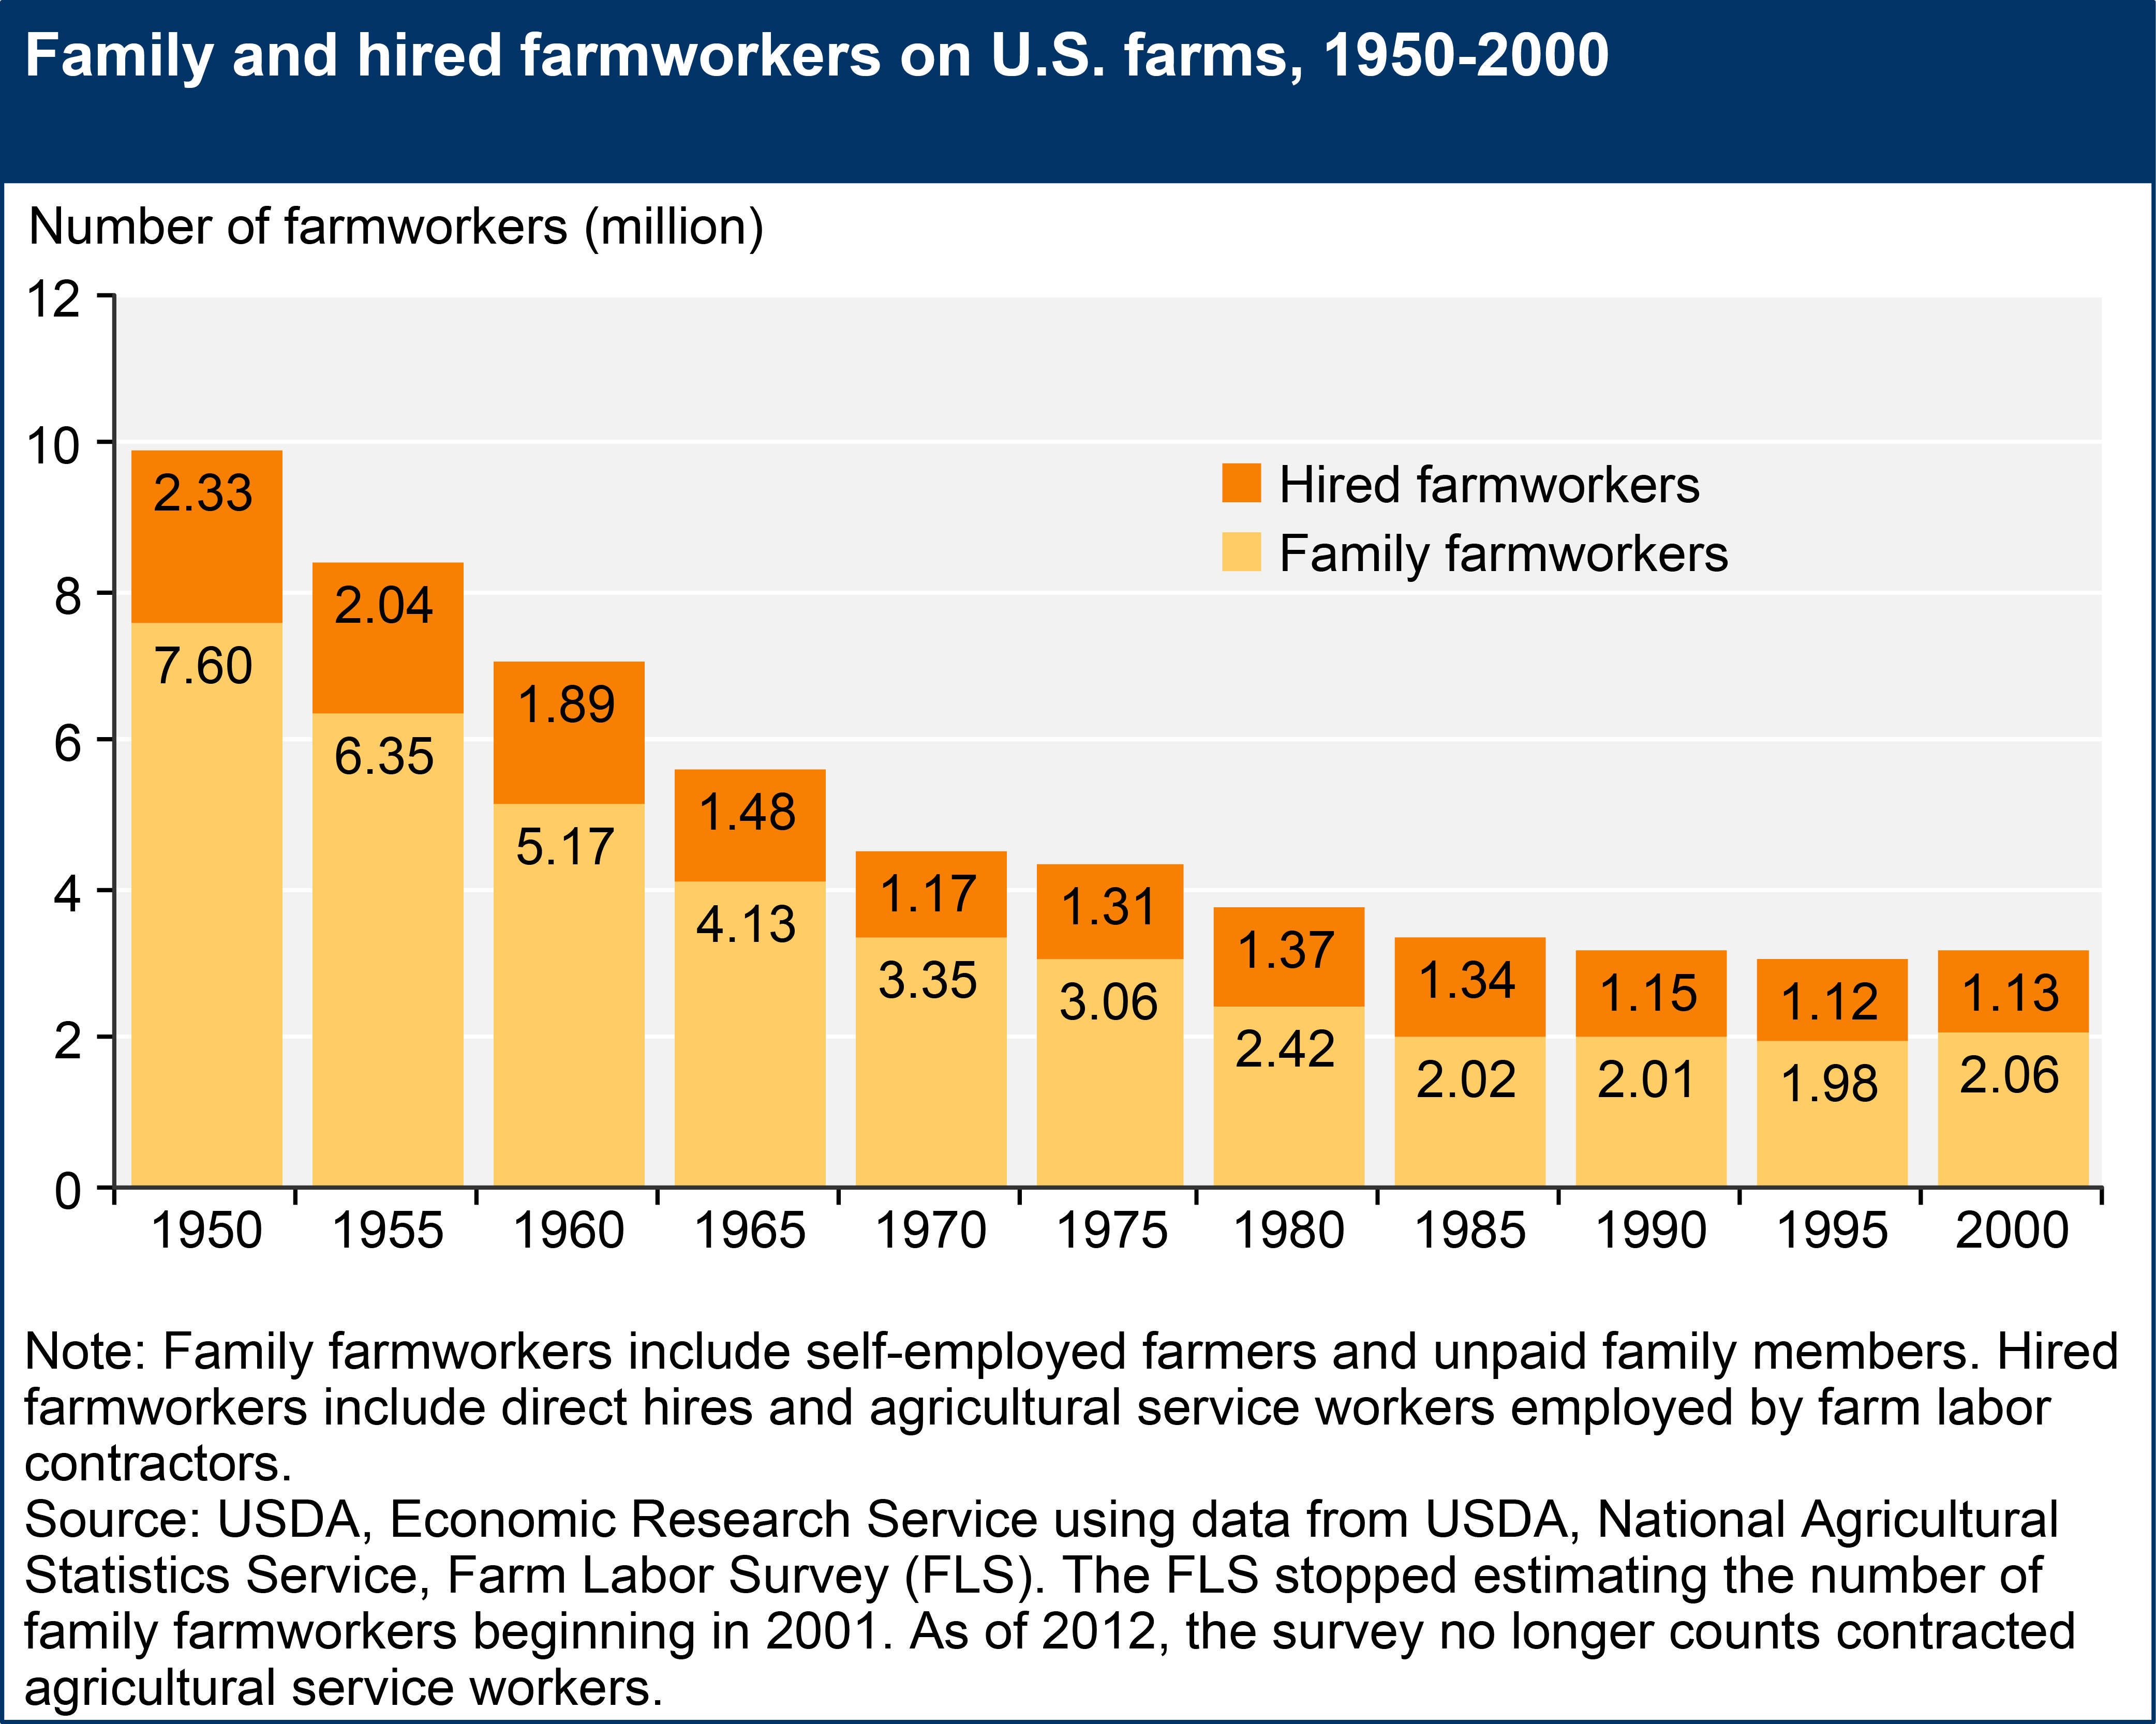 Graph of Family and Hired Farmworkers on U.S. Farms from 1950 to 2000